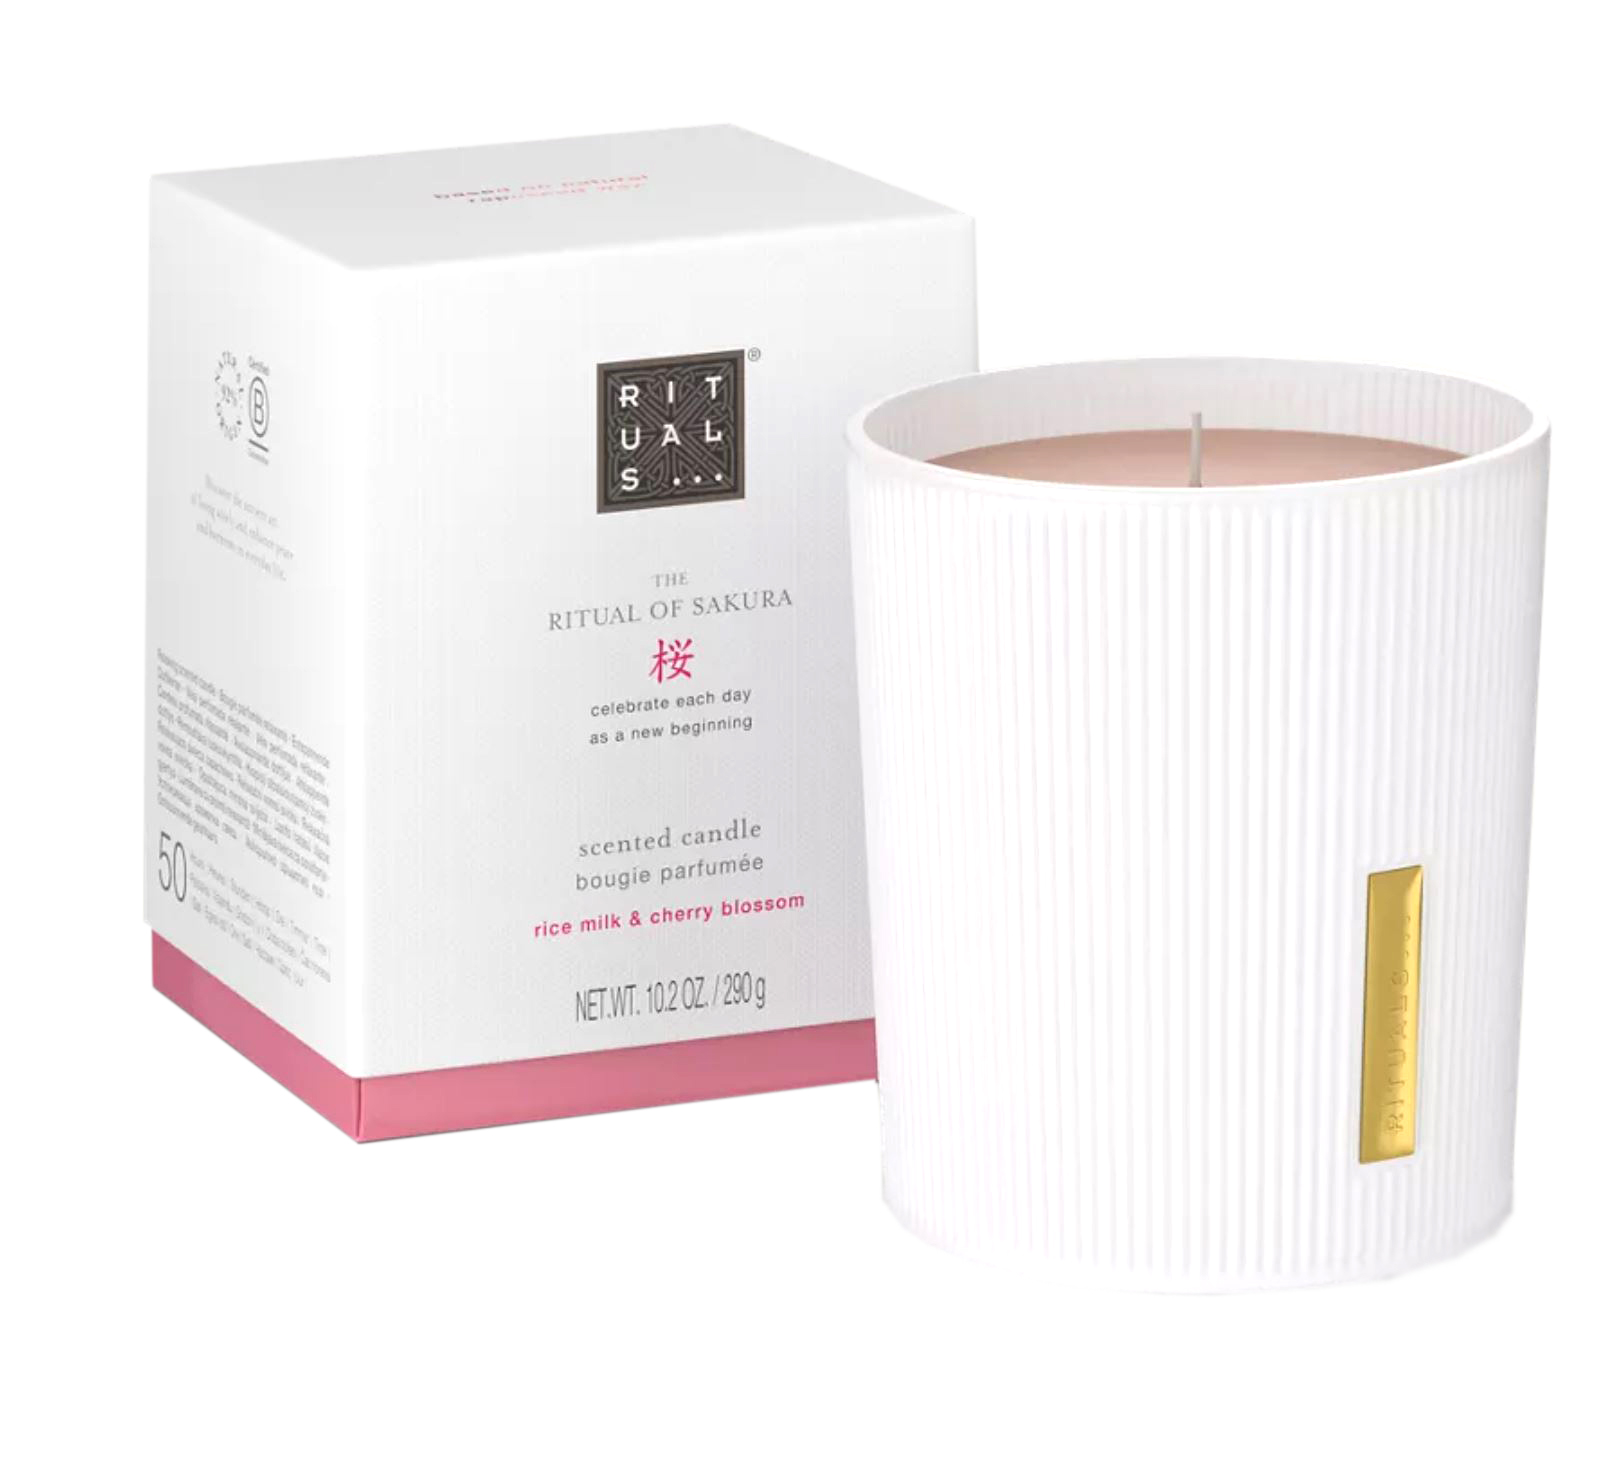 Main product image for The Ritual Of Sakura Scented Candle